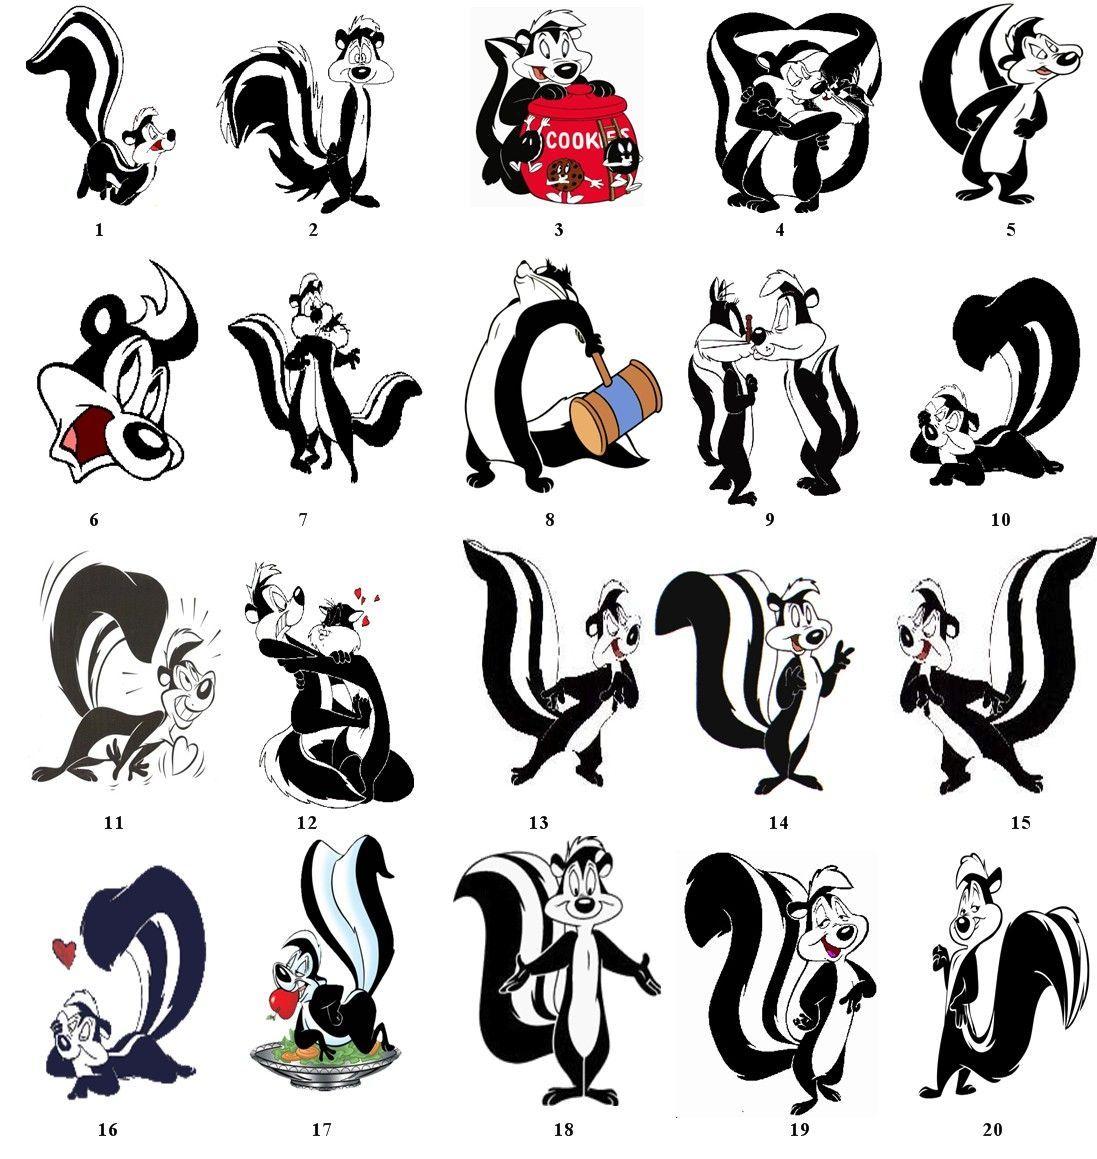 Pepe Le Pew the skunk and his on going infatuation with Penelope.